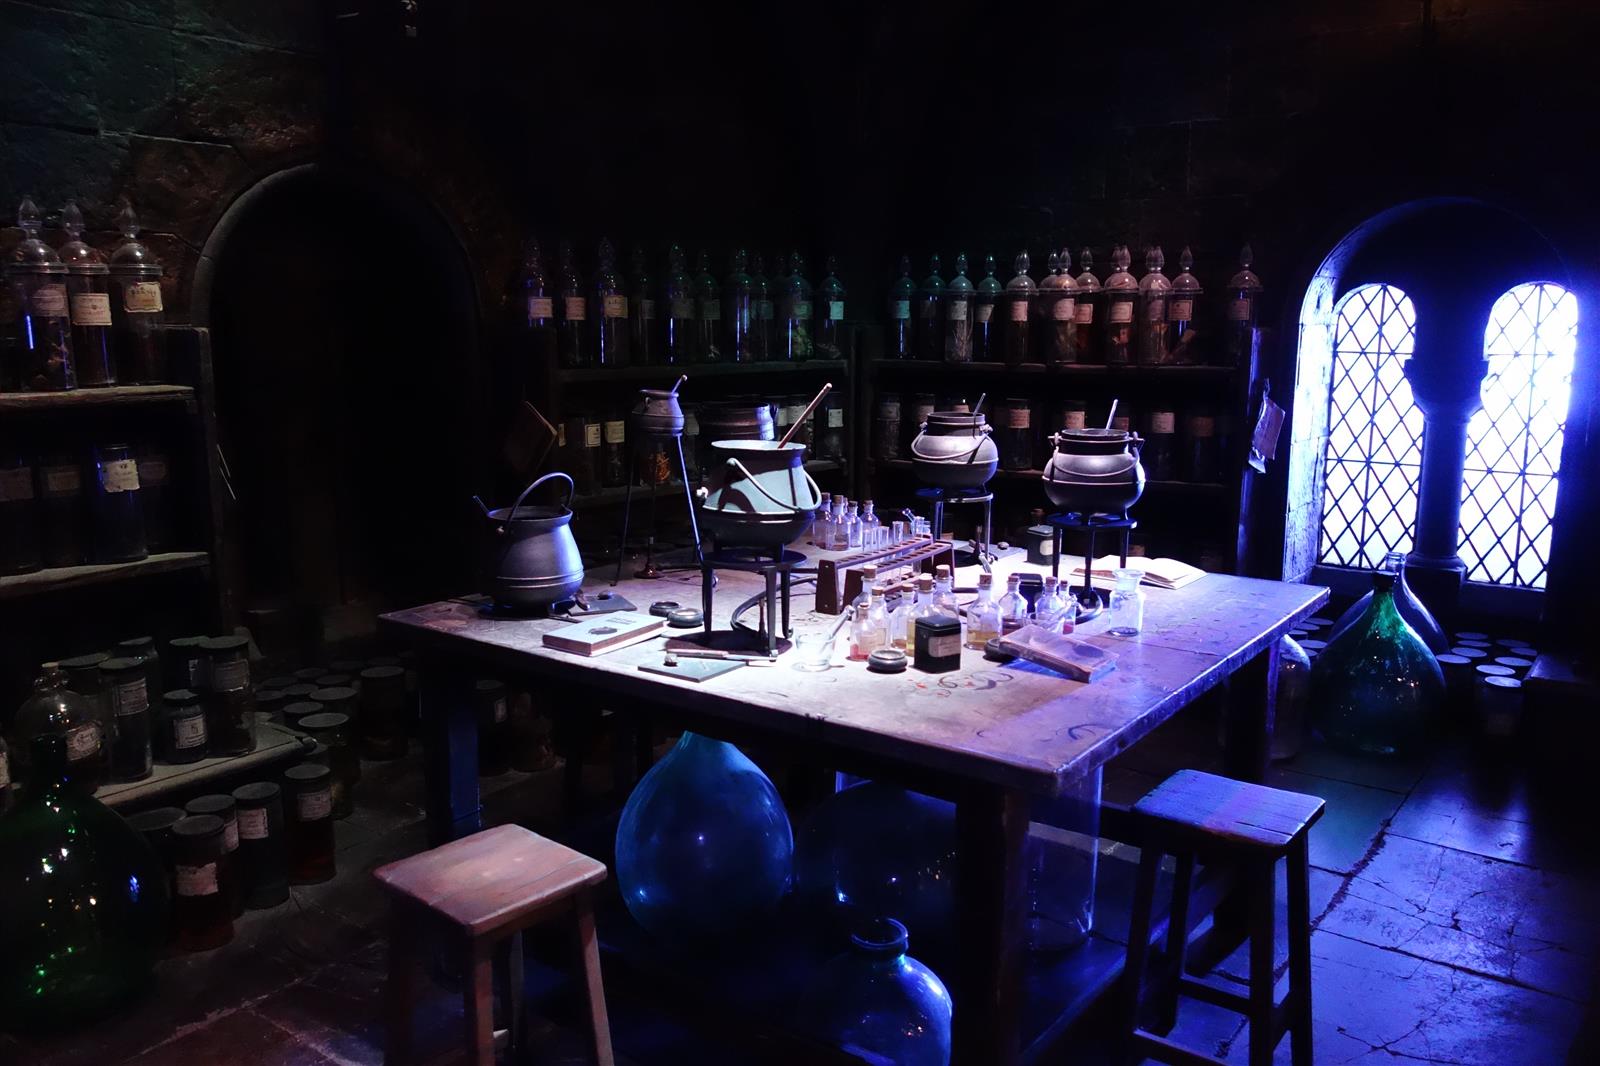 35. The Potions Class Set